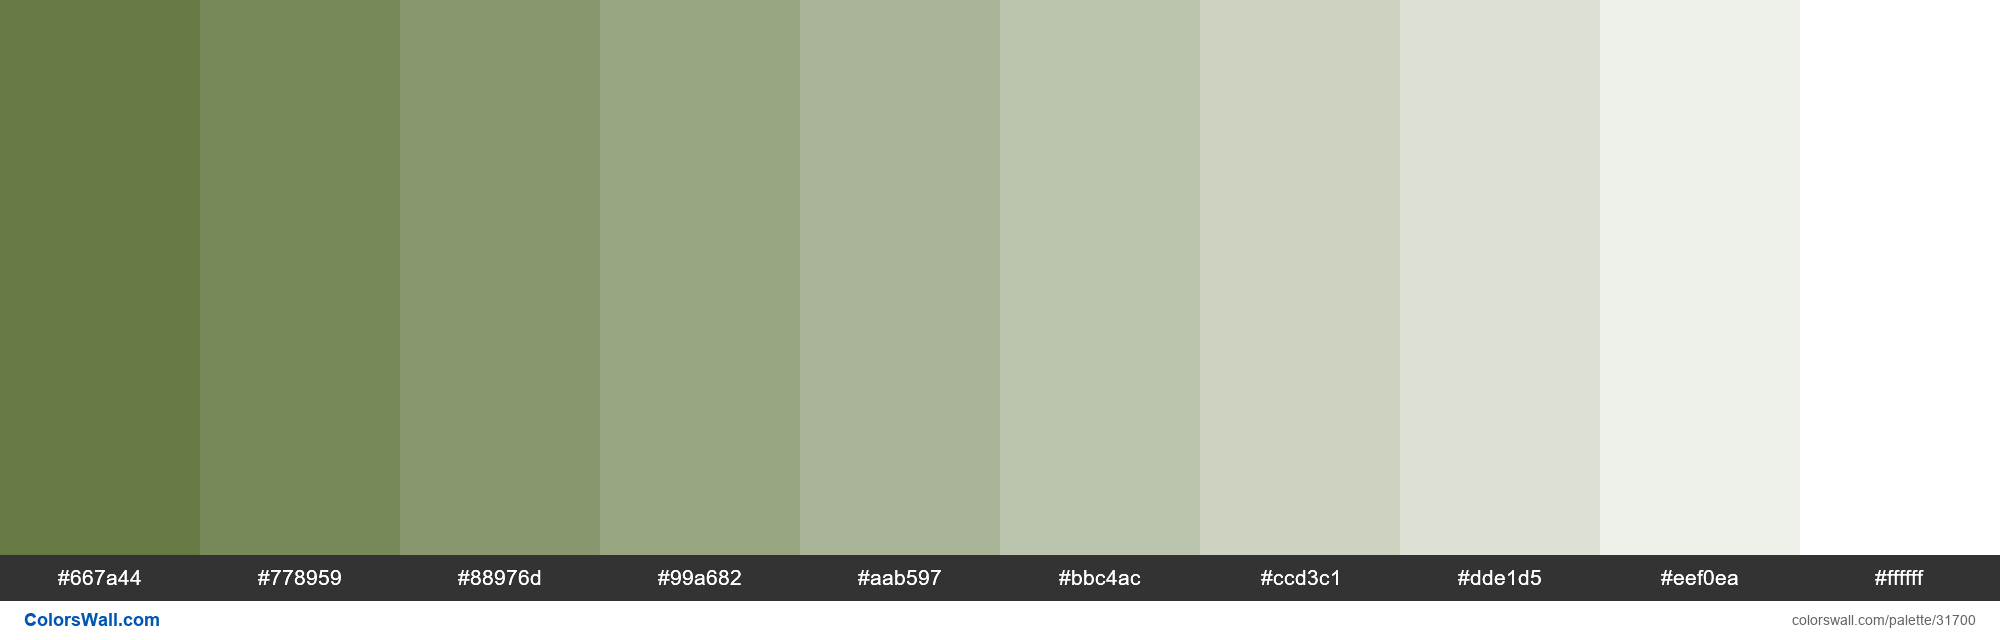 Dark Olive Green #556b2f Hex Color (Shades & Complementary Colors)